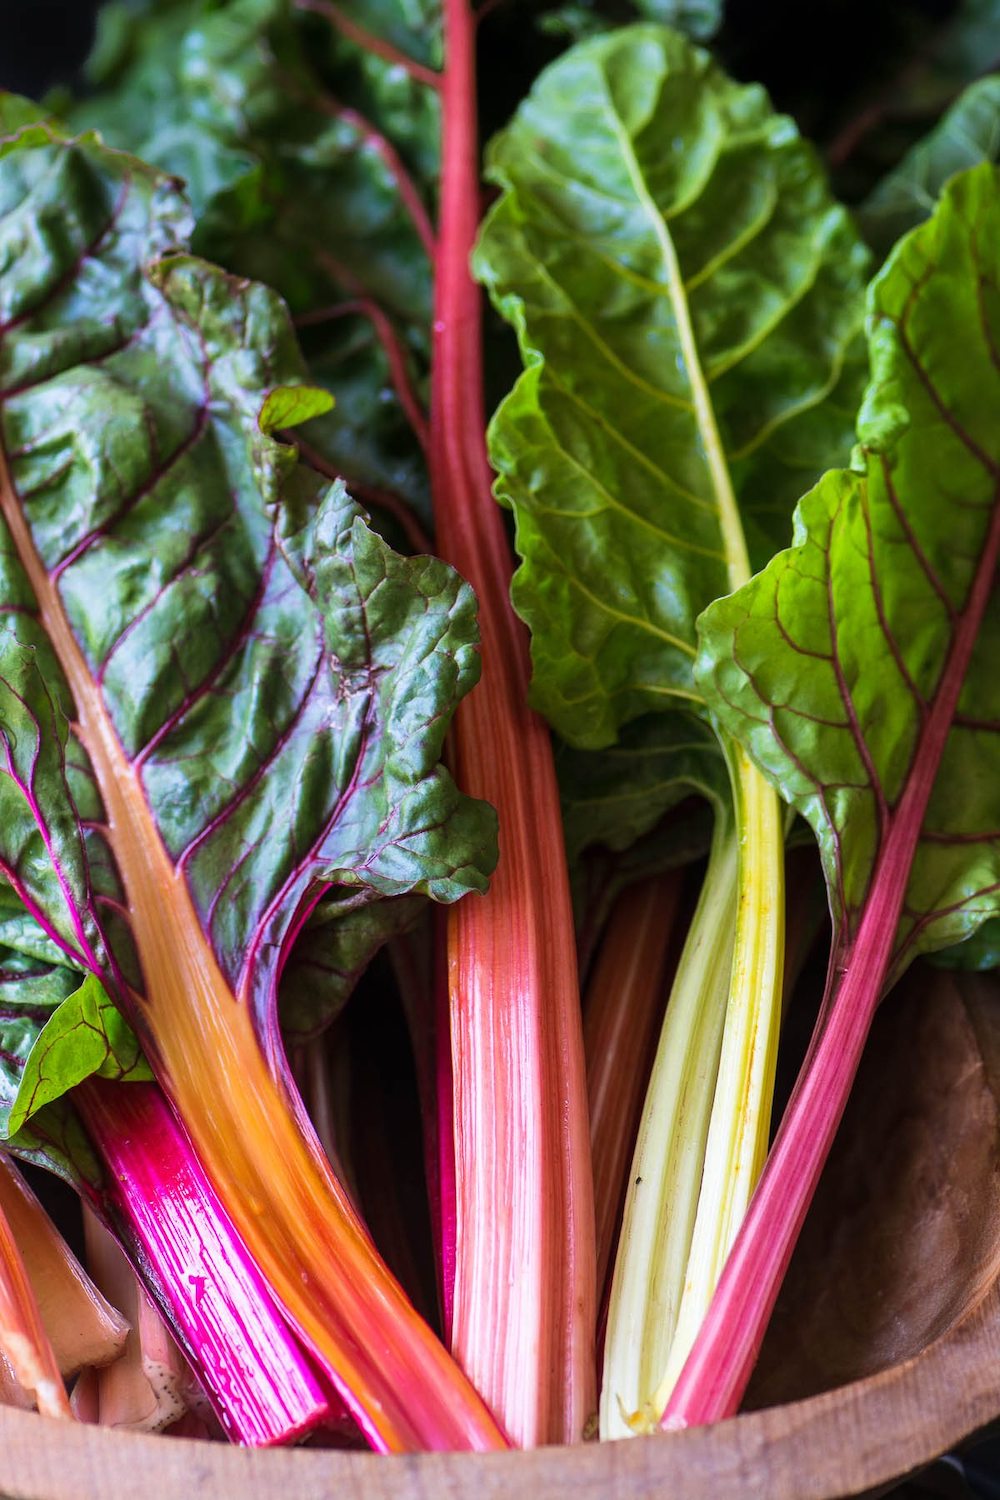 rainbow chard stems and greens in a wooden bowl